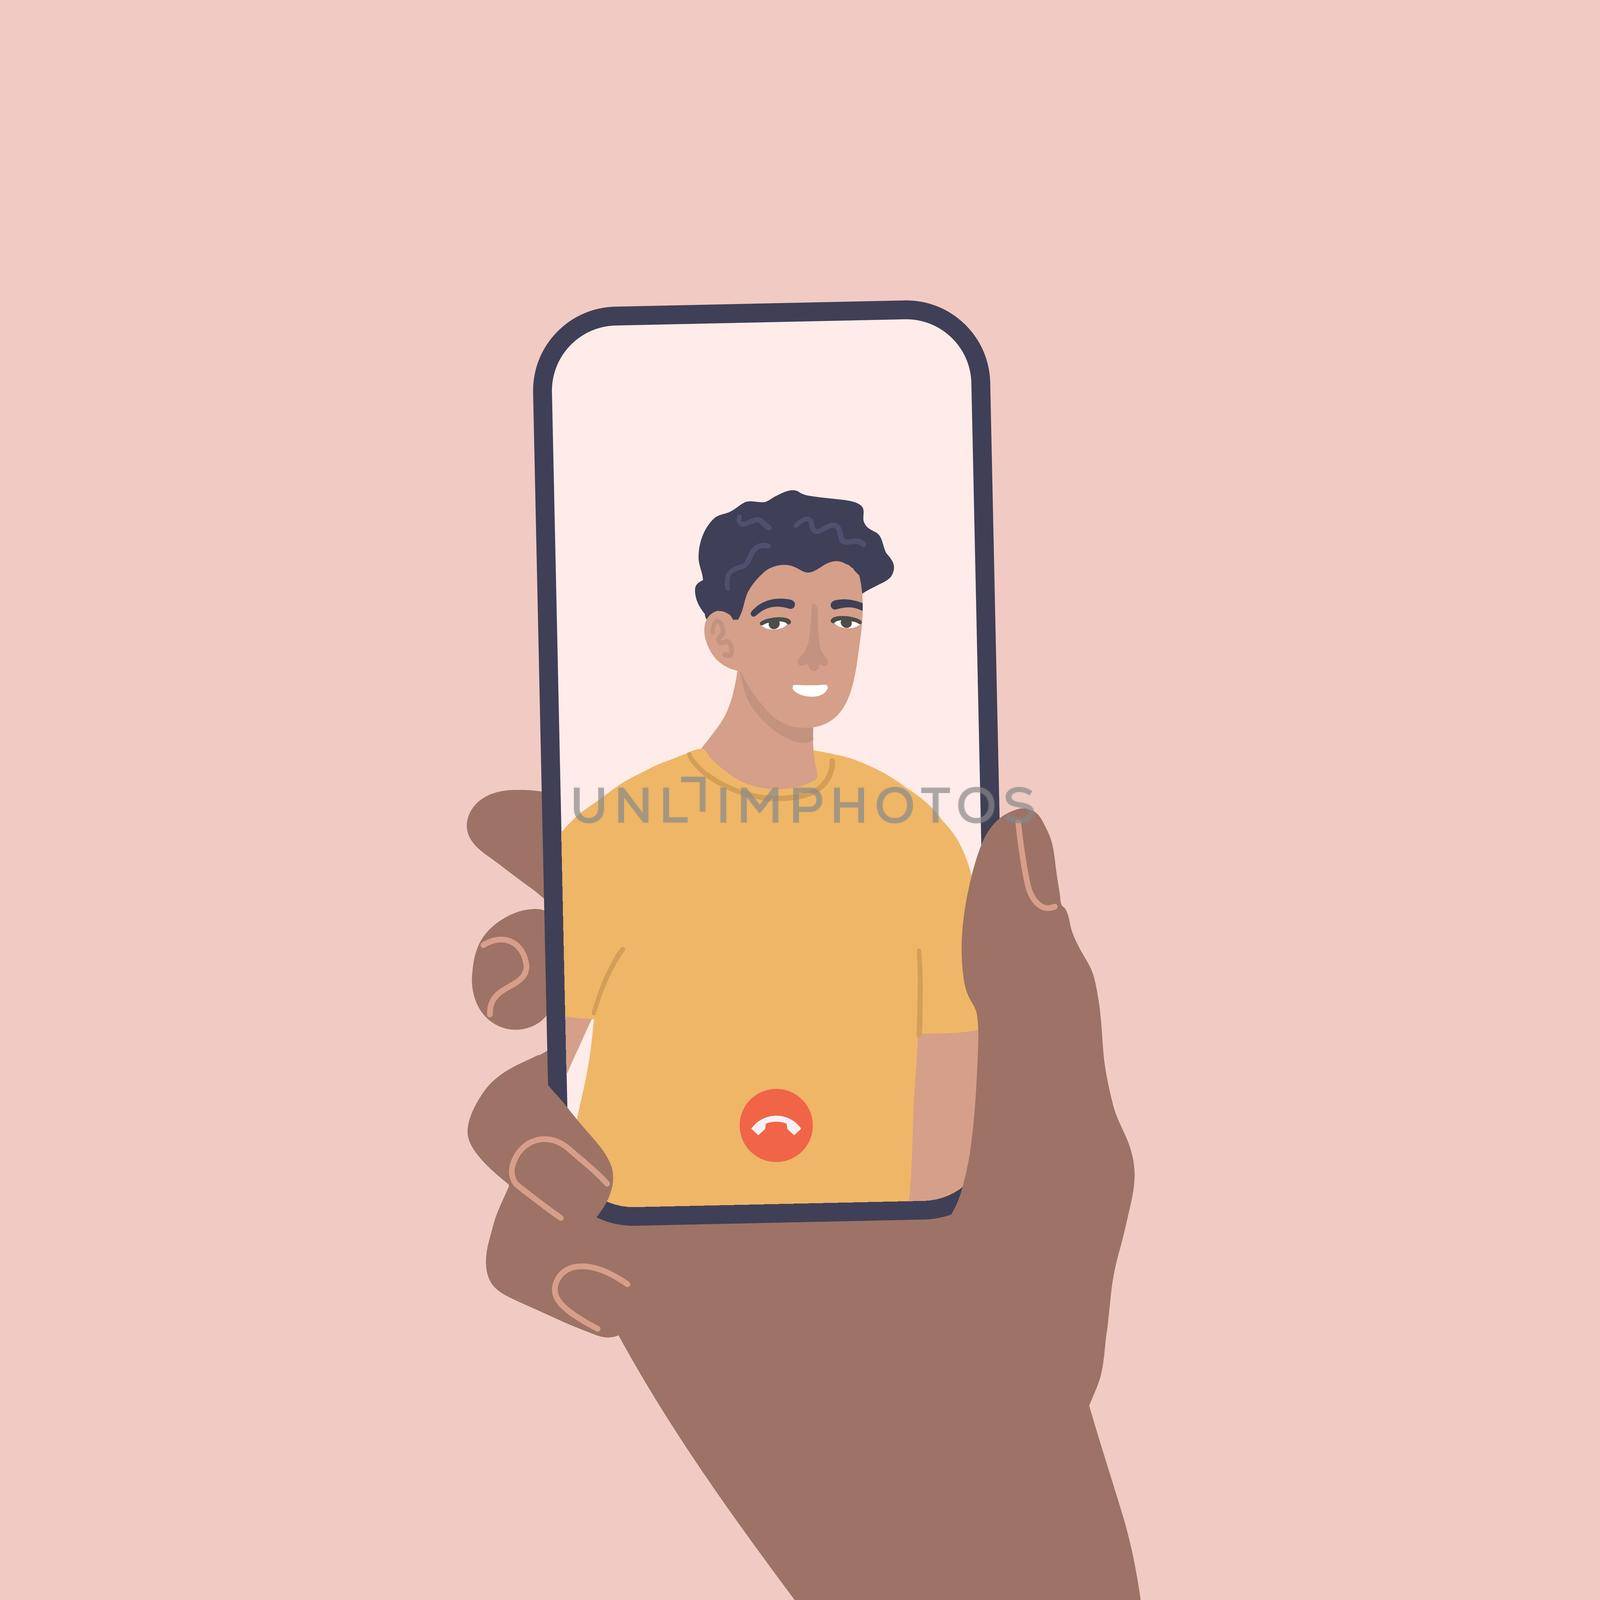 Incoming call on phone screen. Video chat. Calling service. Vector illustration